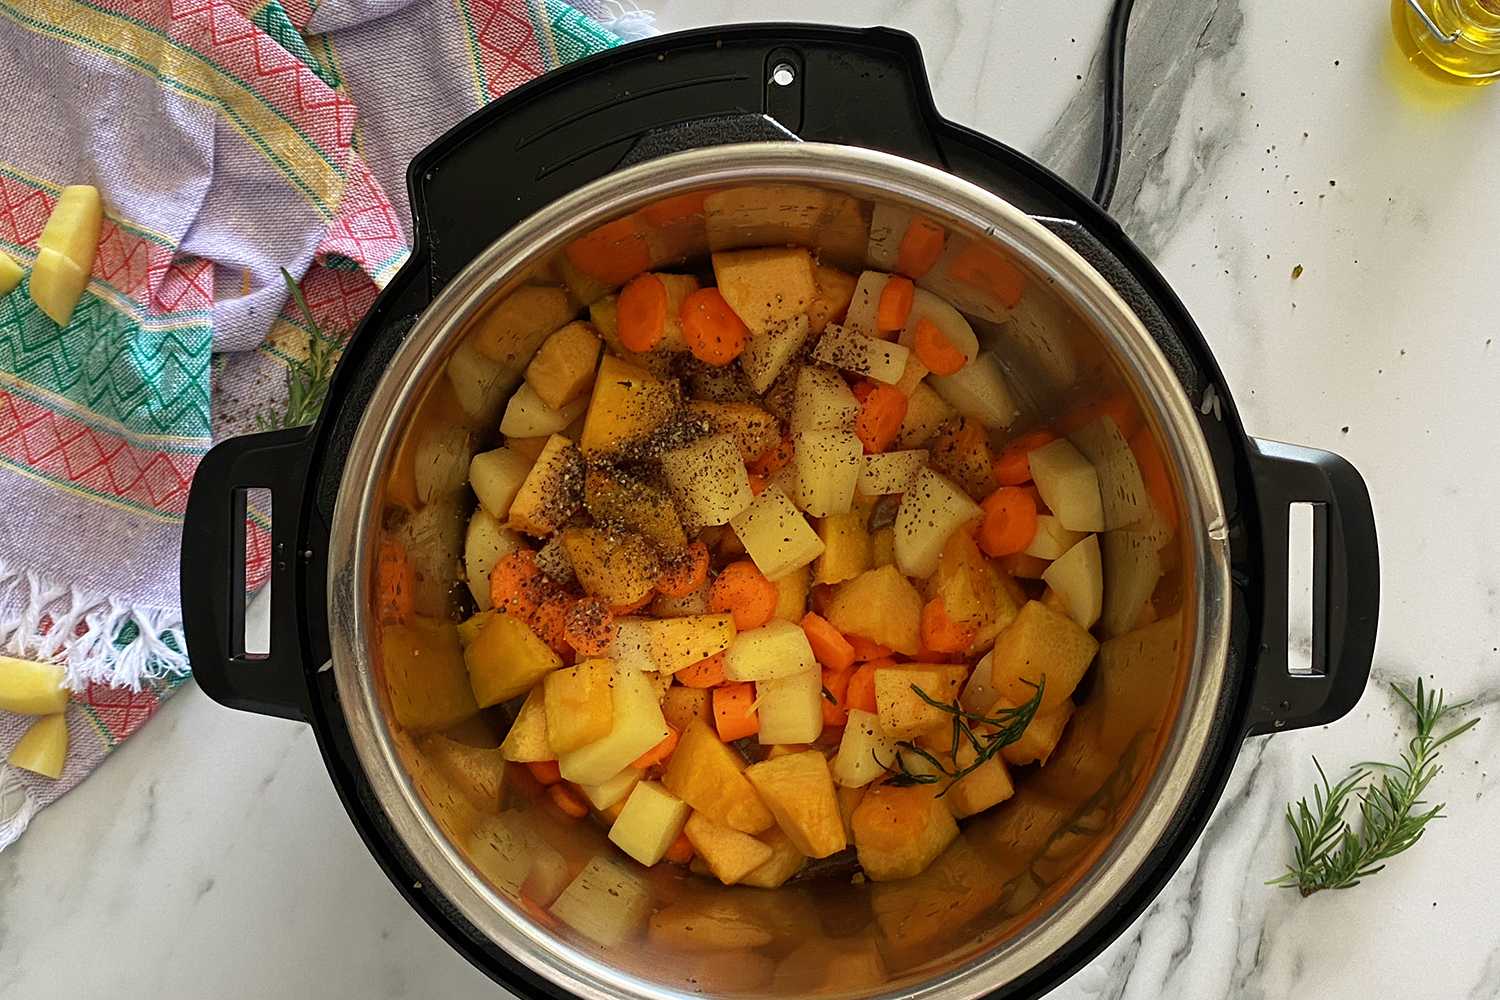 How To Steam Vegetables In An Electric Pressure Cooker | Storables